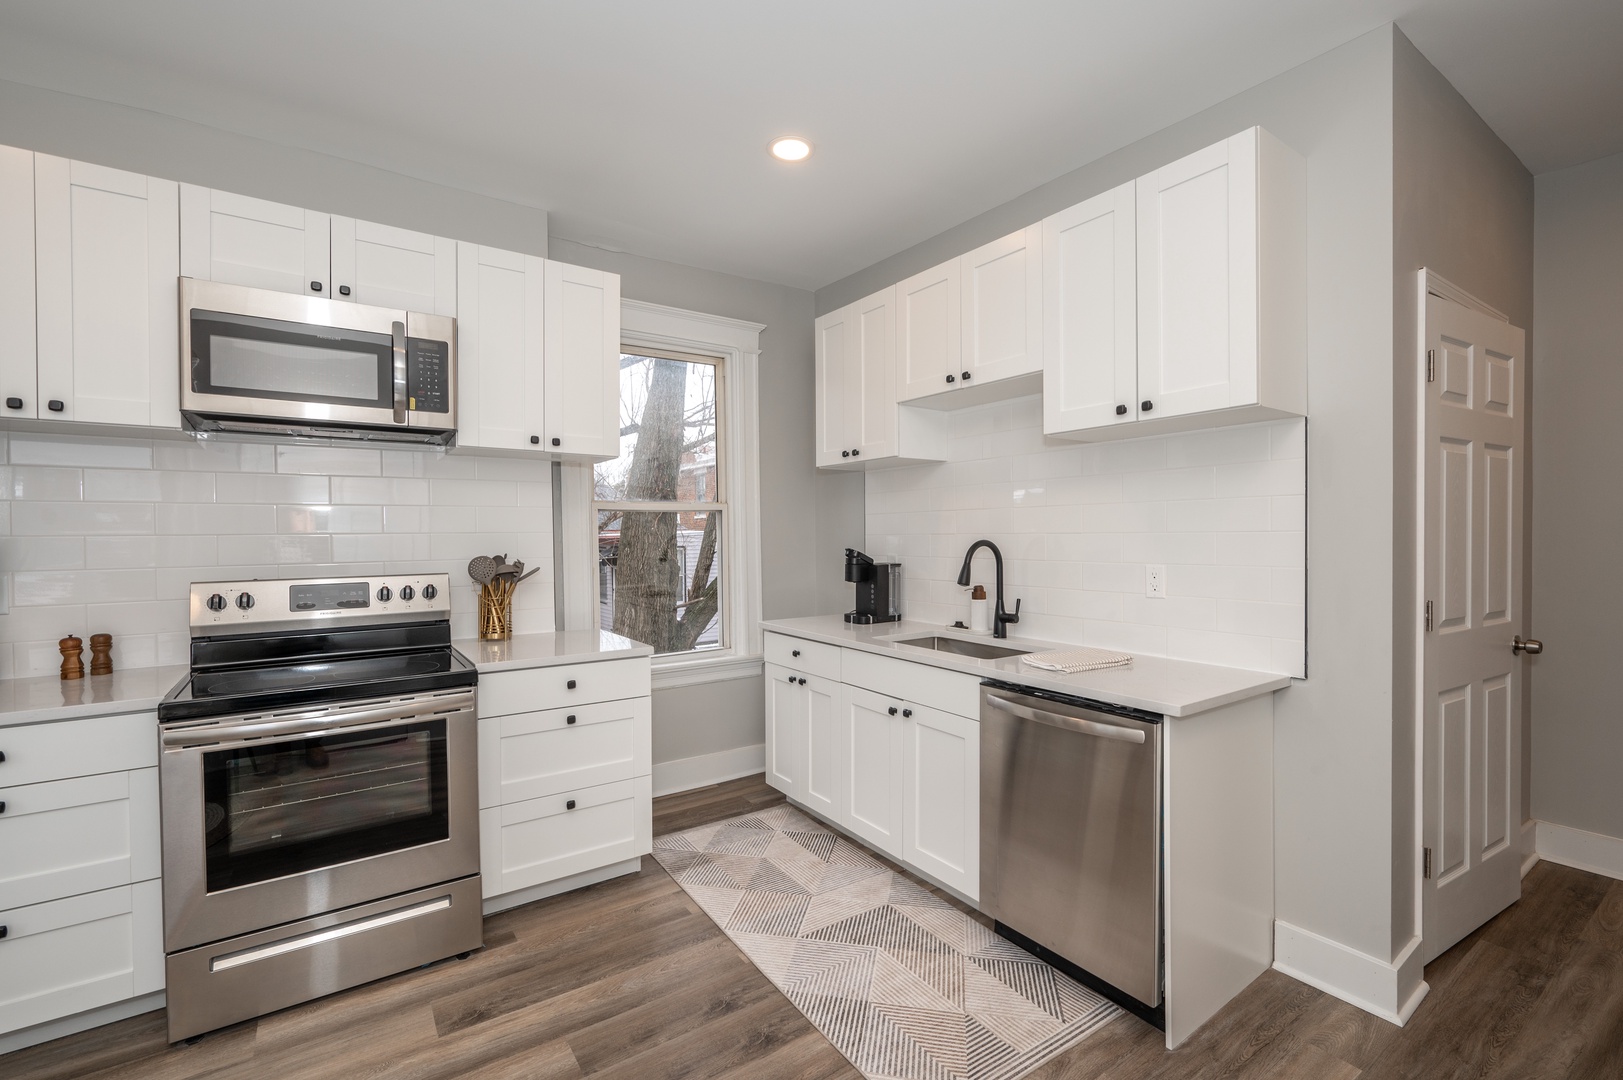 Apt 2 – The eat-in kitchen offers ample space & all the comforts of home